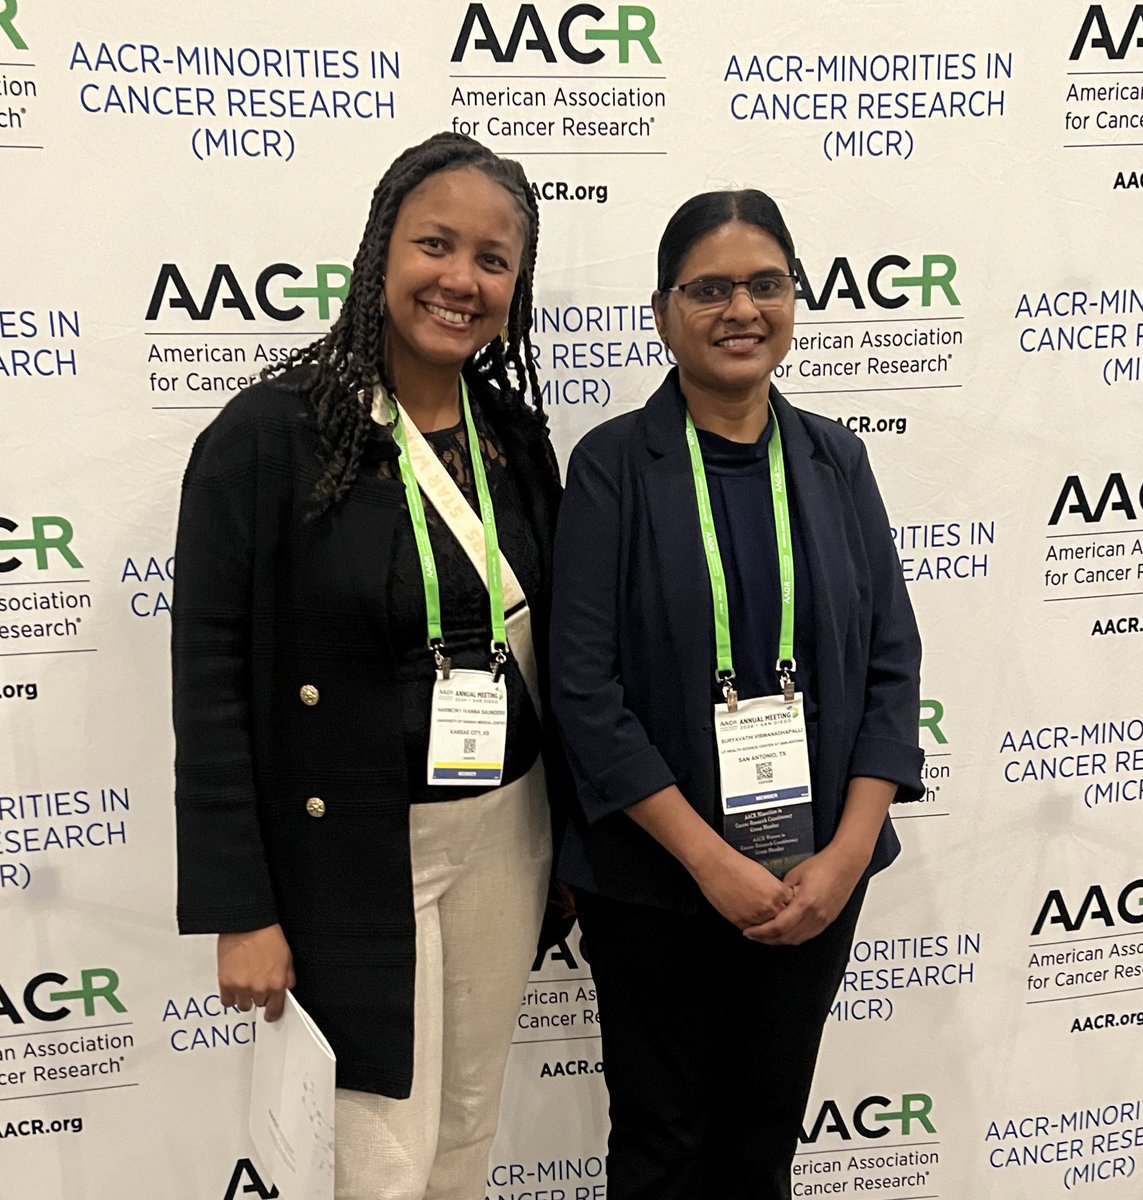 Thank you @AACR Minorities in Research Council for honoring me as a trainee and Dr. Viswanadhipalli as an excellent faculty member! #AACR24 @KUcancercenter